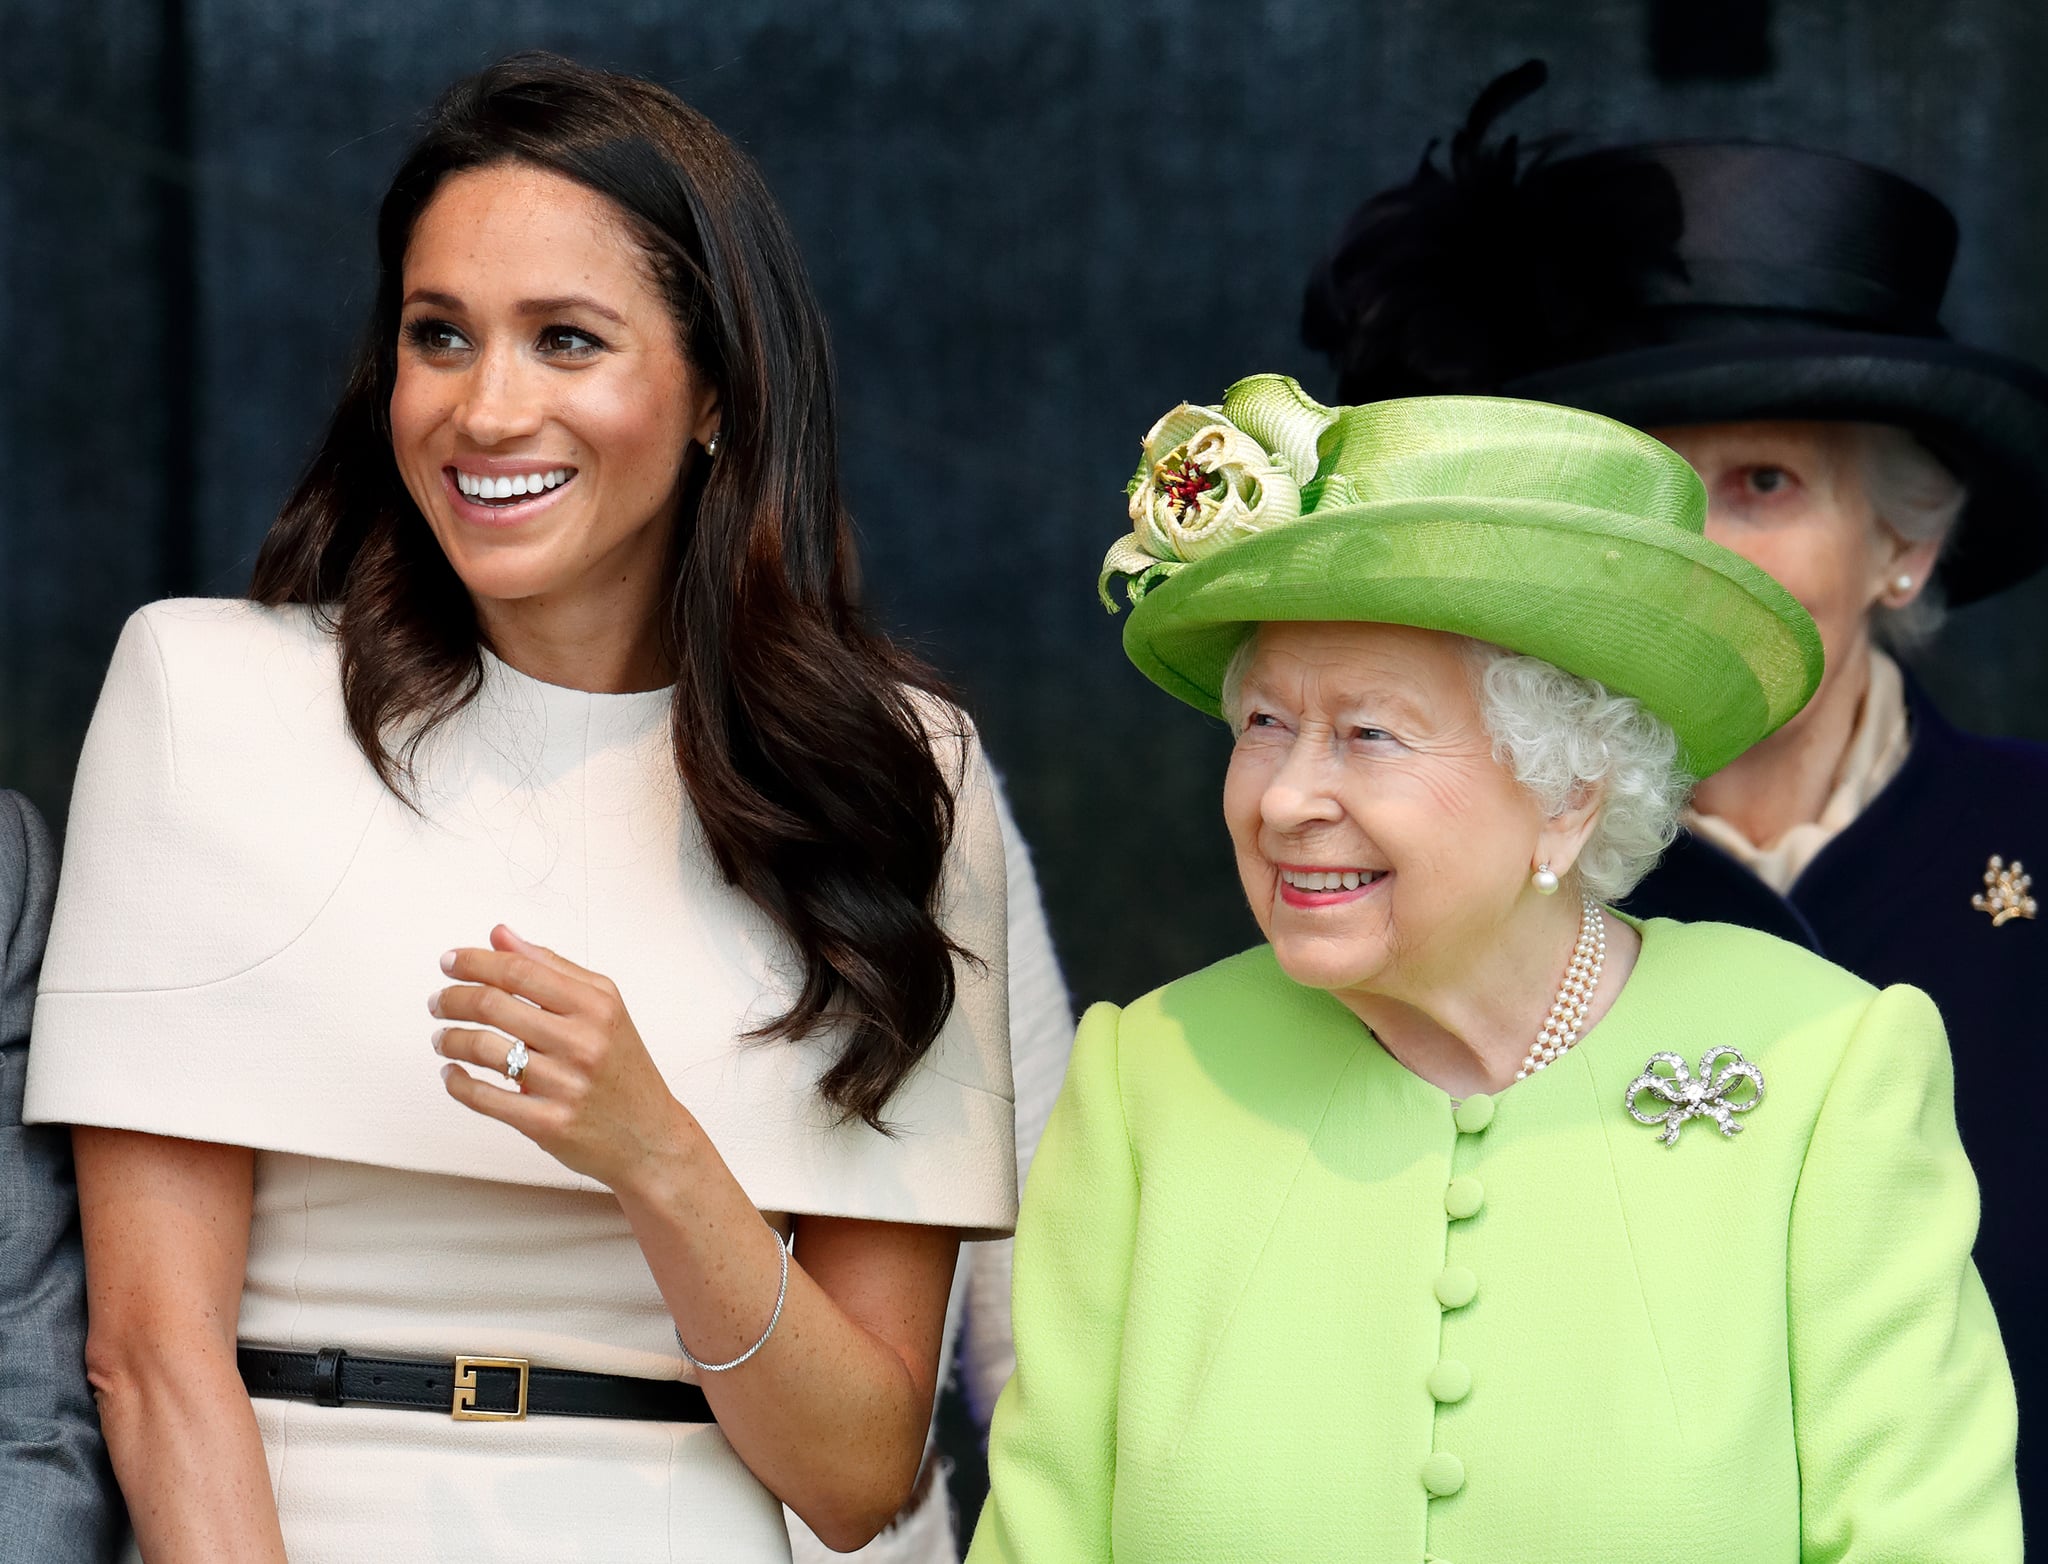 WIDNES, UNITED KINGDOM - JUNE 14: (EMBARGOED FOR PUBLICATION IN UK NEWSPAPERS UNTIL 24 HOURS AFTER CREATE DATE AND TIME) Meghan, Duchess of Sussex and Queen Elizabeth II attend a ceremony to open the new Mersey Gateway Bridge on June 14, 2018 in Widnes, England. Meghan Markle married Prince Harry last month to become The Duchess of Sussex and this is her first engagement with the Queen. During the visit the pair will open a road bridge in Widnes and visit The Storyhouse and Town Hall in Chester. (Photo by Max Mumby/Indigo/Getty Images)